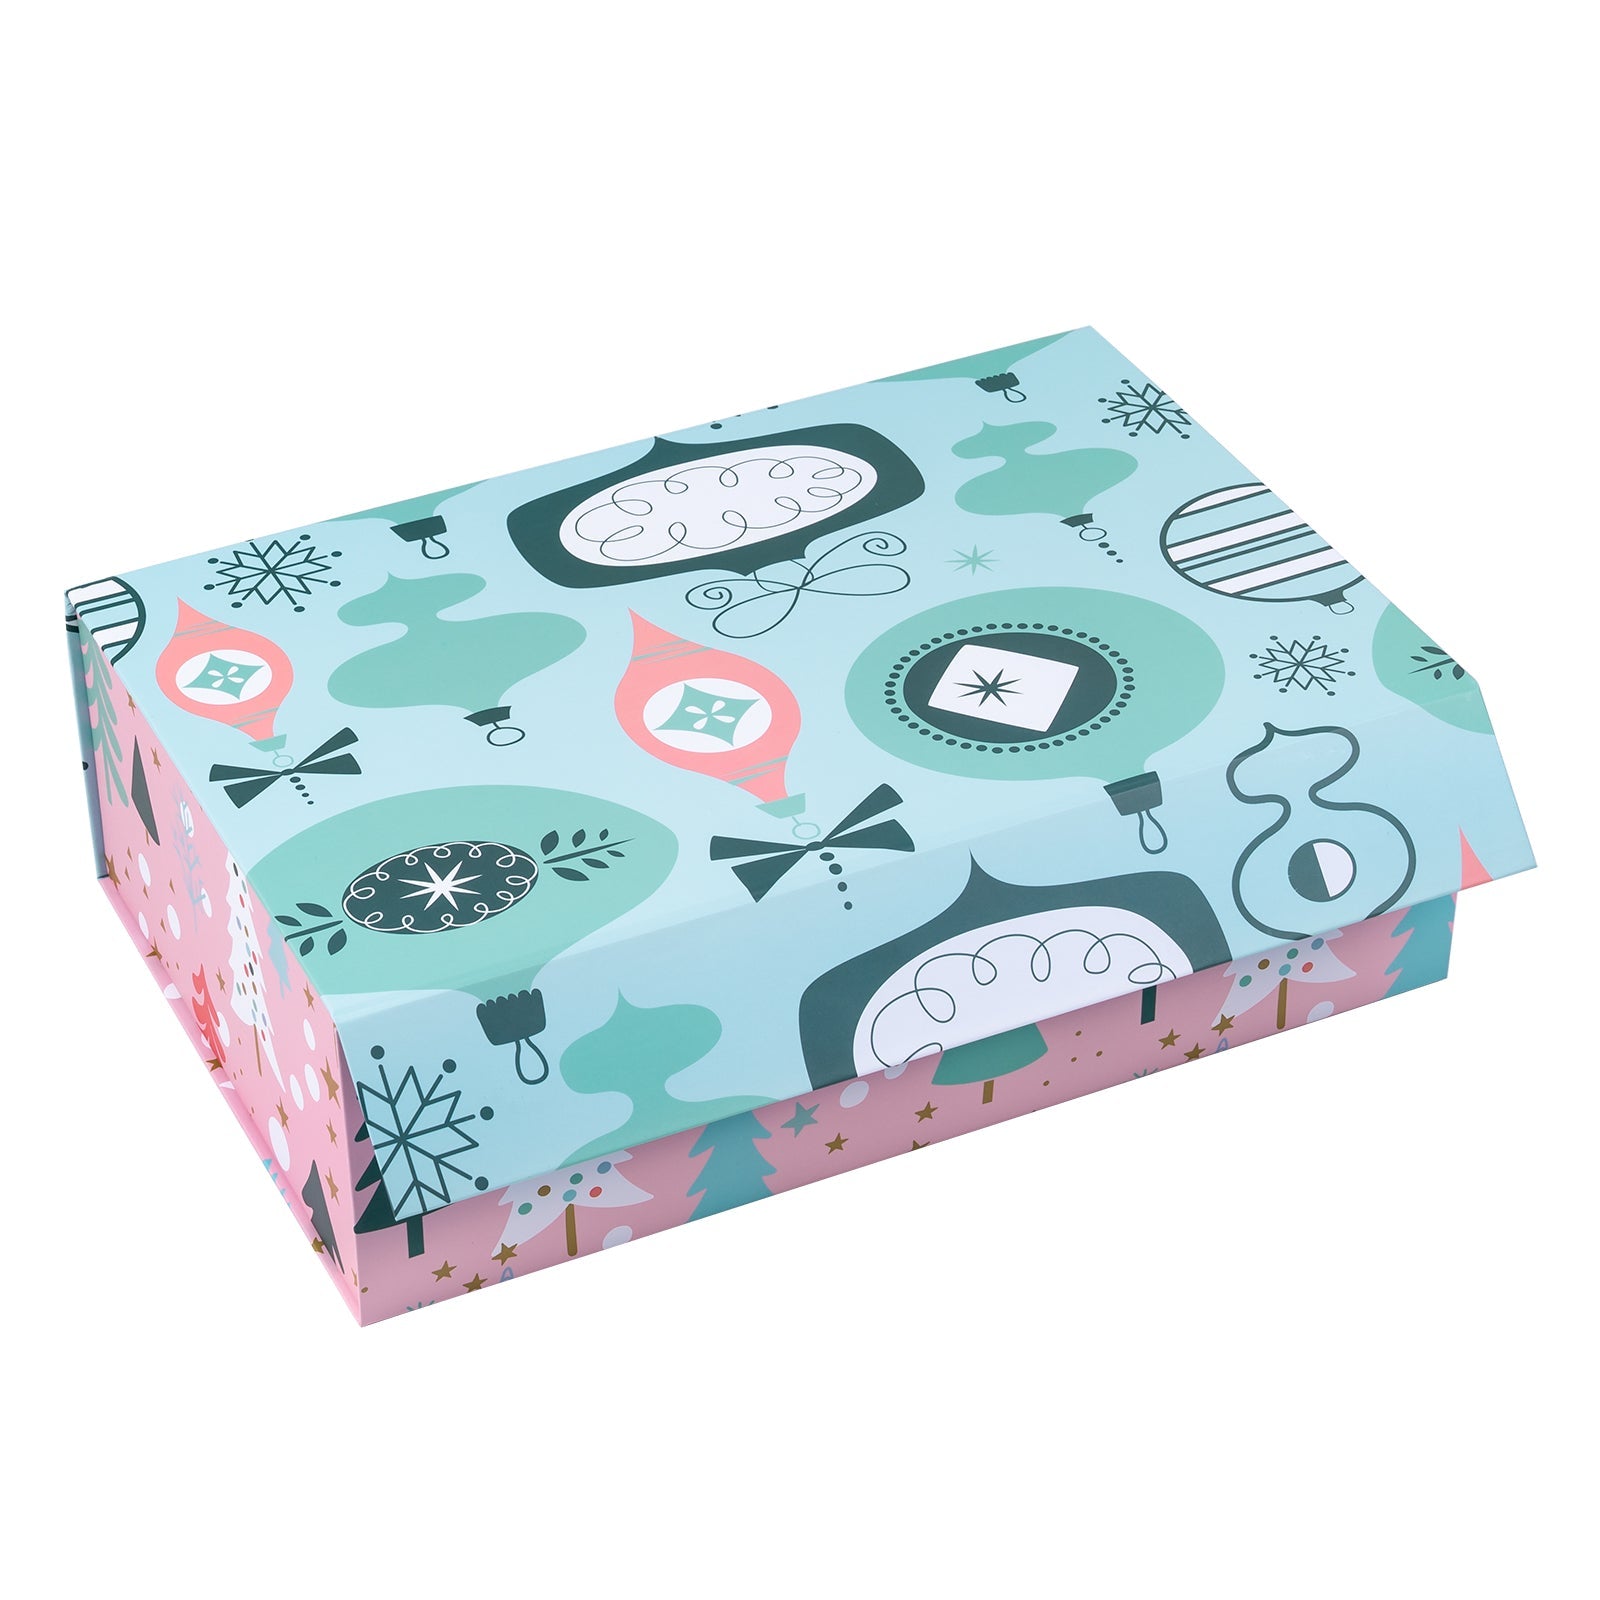 14x9x4.3 inch Collapsible Gift Box with Magnetic Closure - Pink & Blue